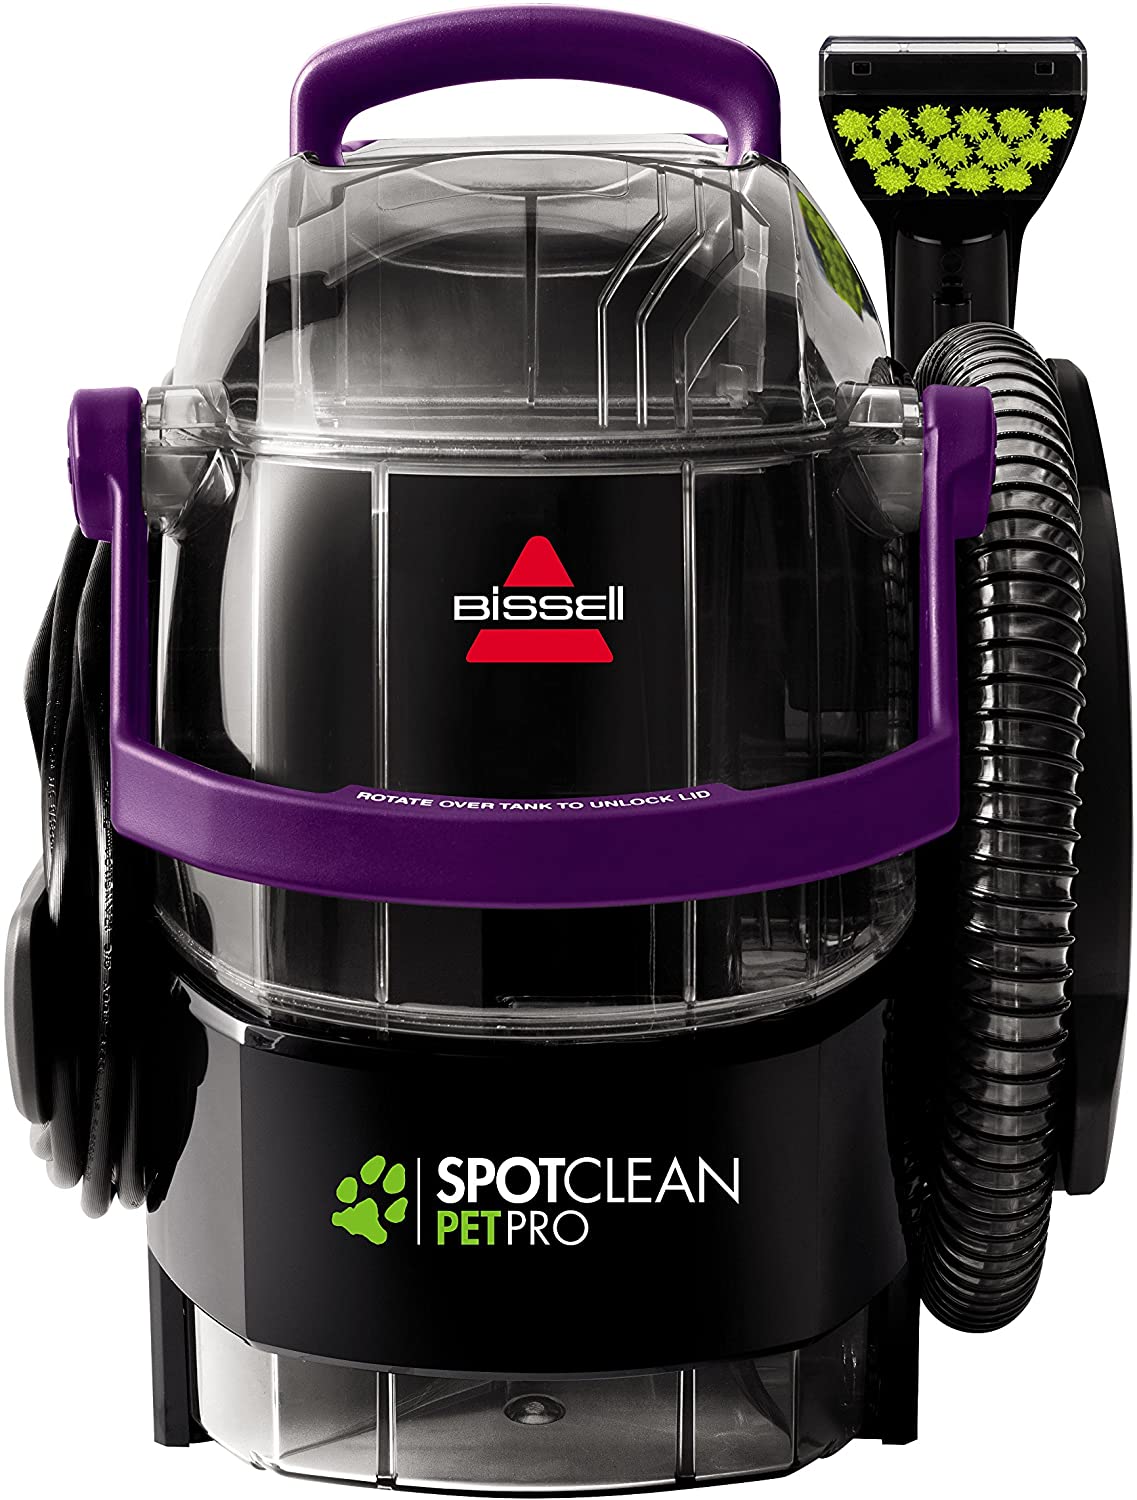 BISSELL SpotClean Pet Pro Portable Carpet Cleaner, 2458 